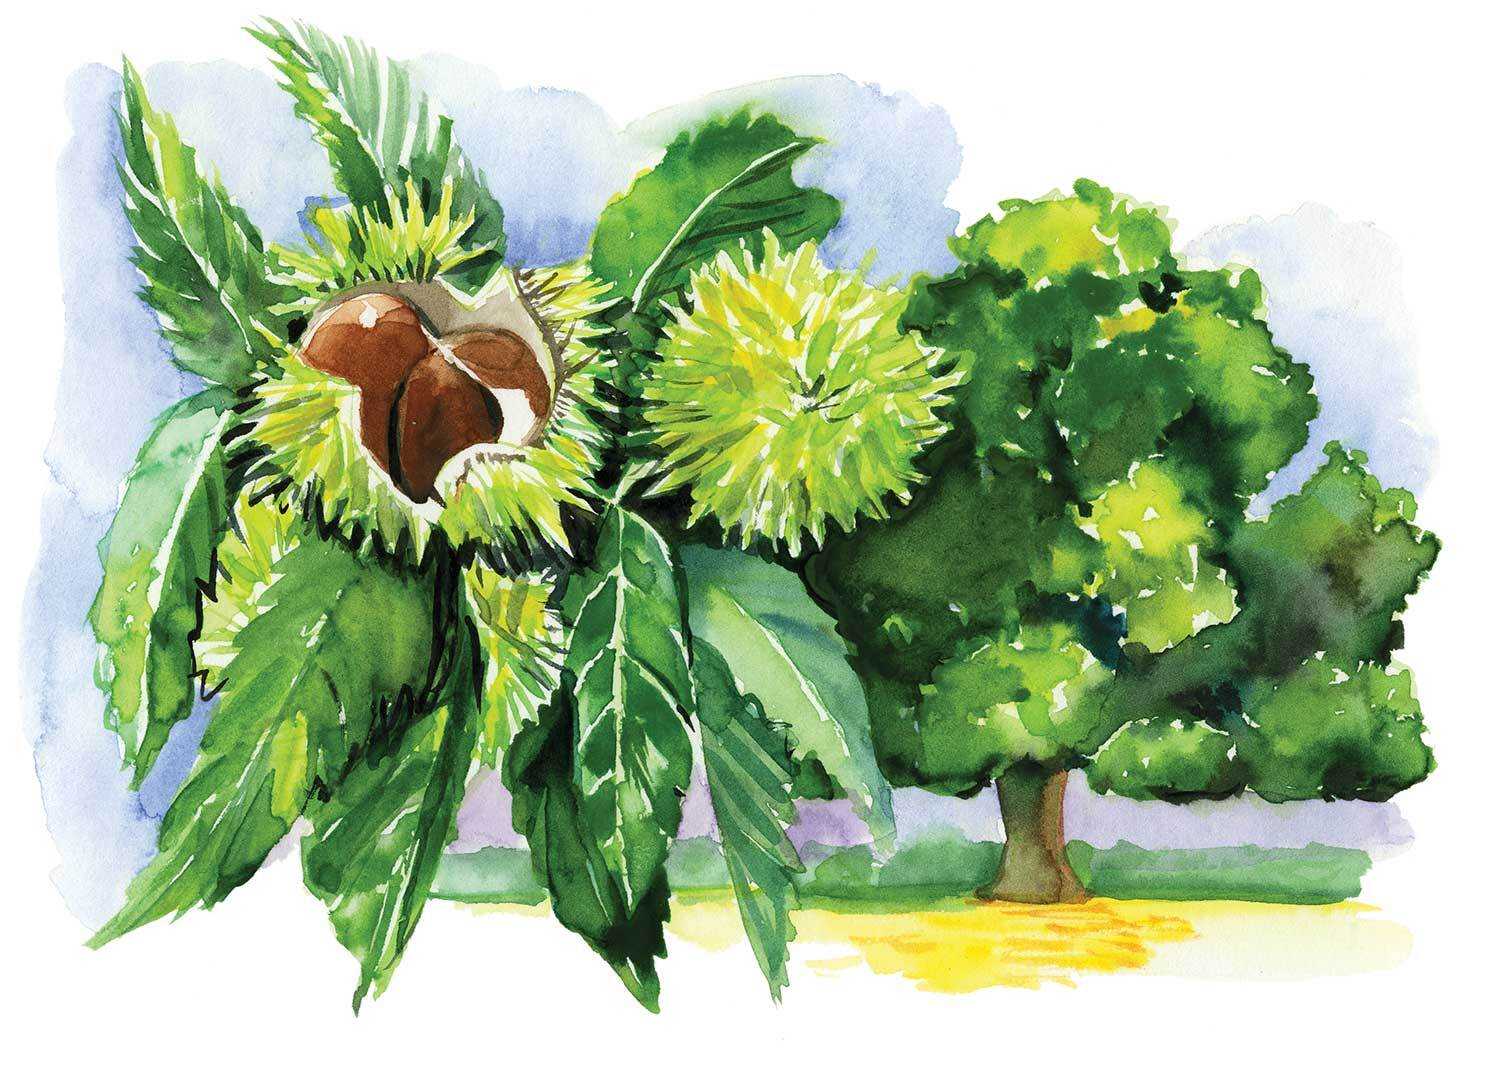 An illustration of the American chestnut